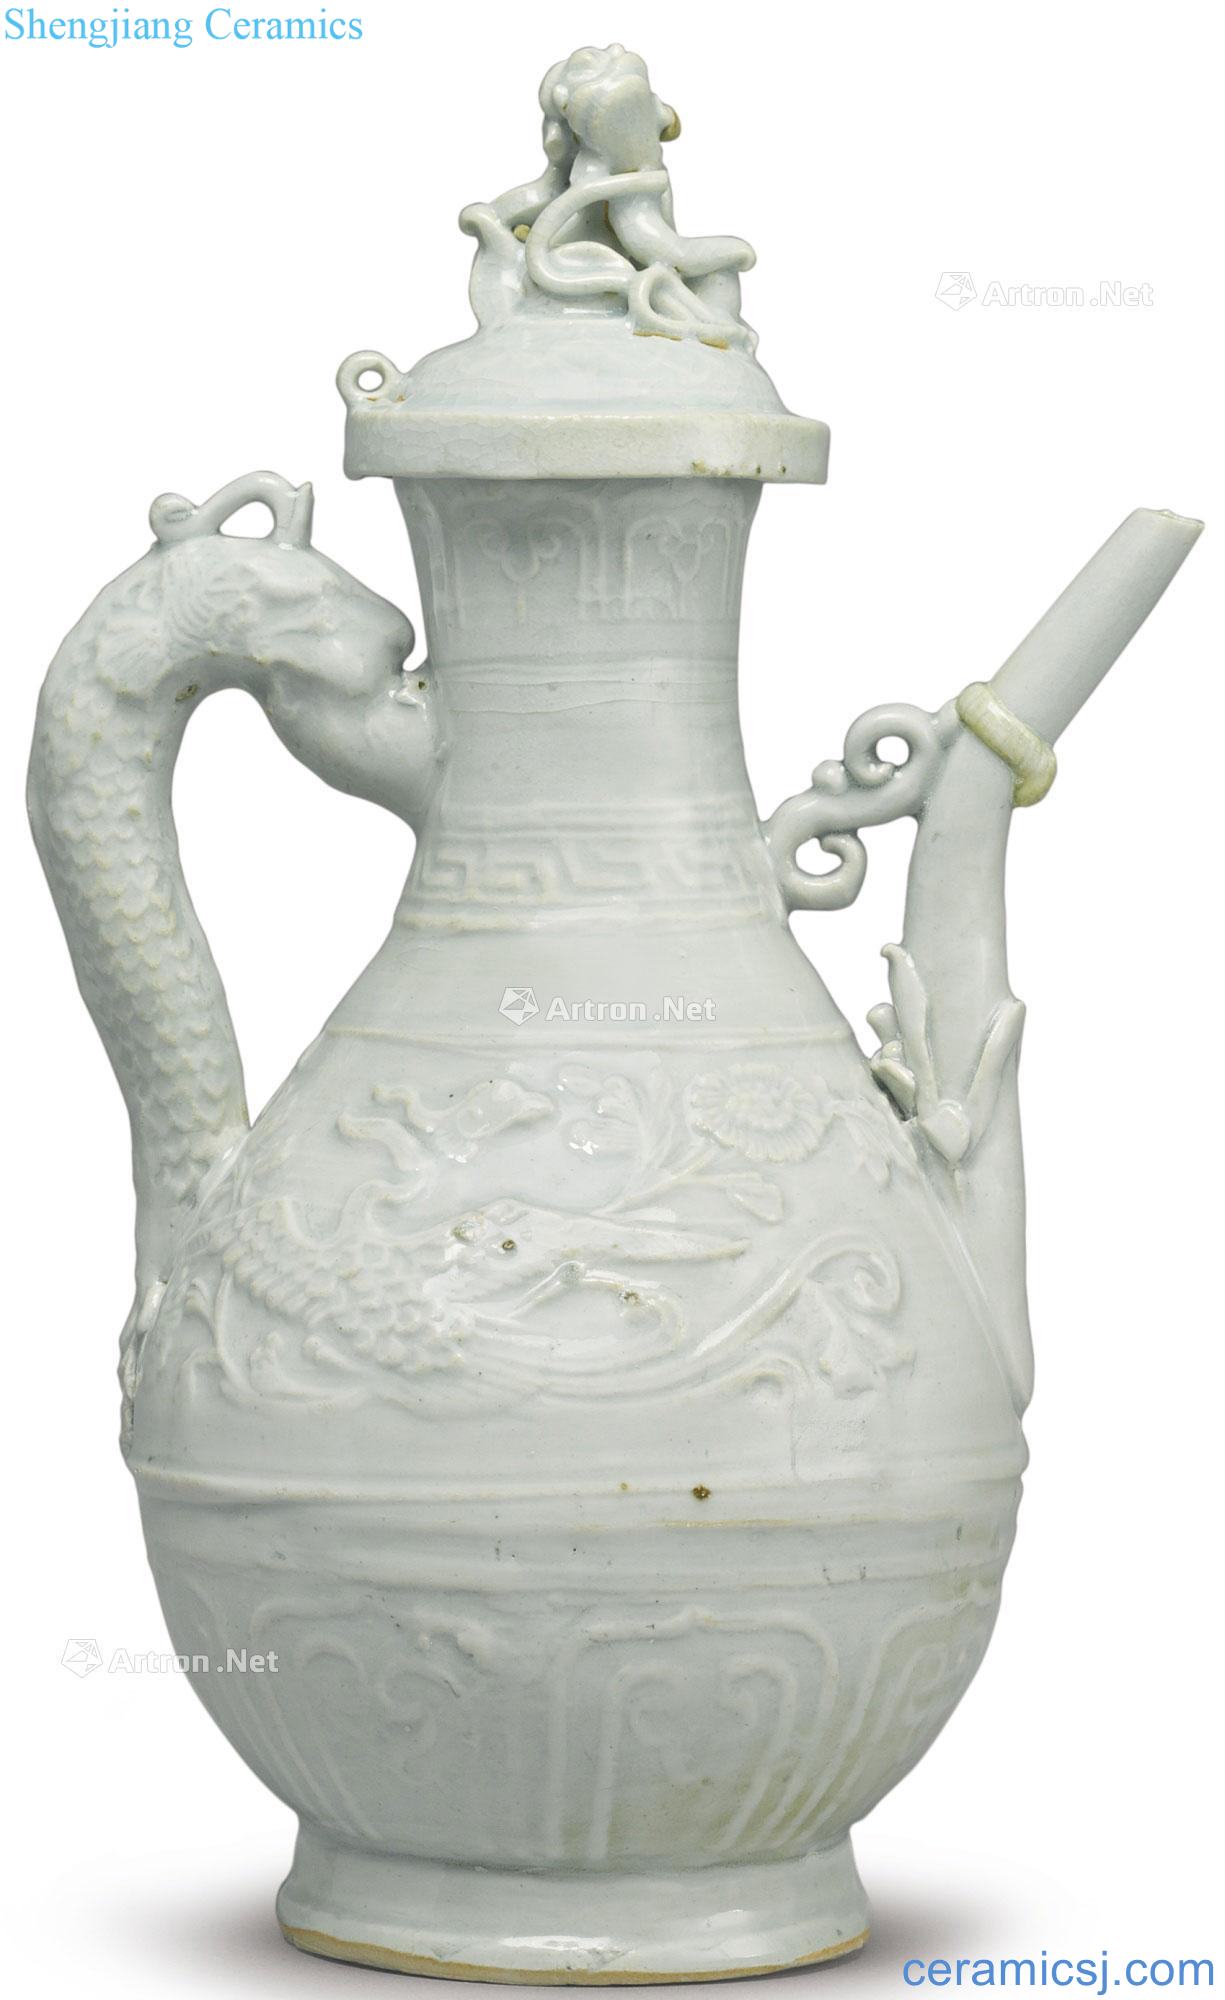 yuan Green white glazed chicken stripes "dragon's handle ewer with cover